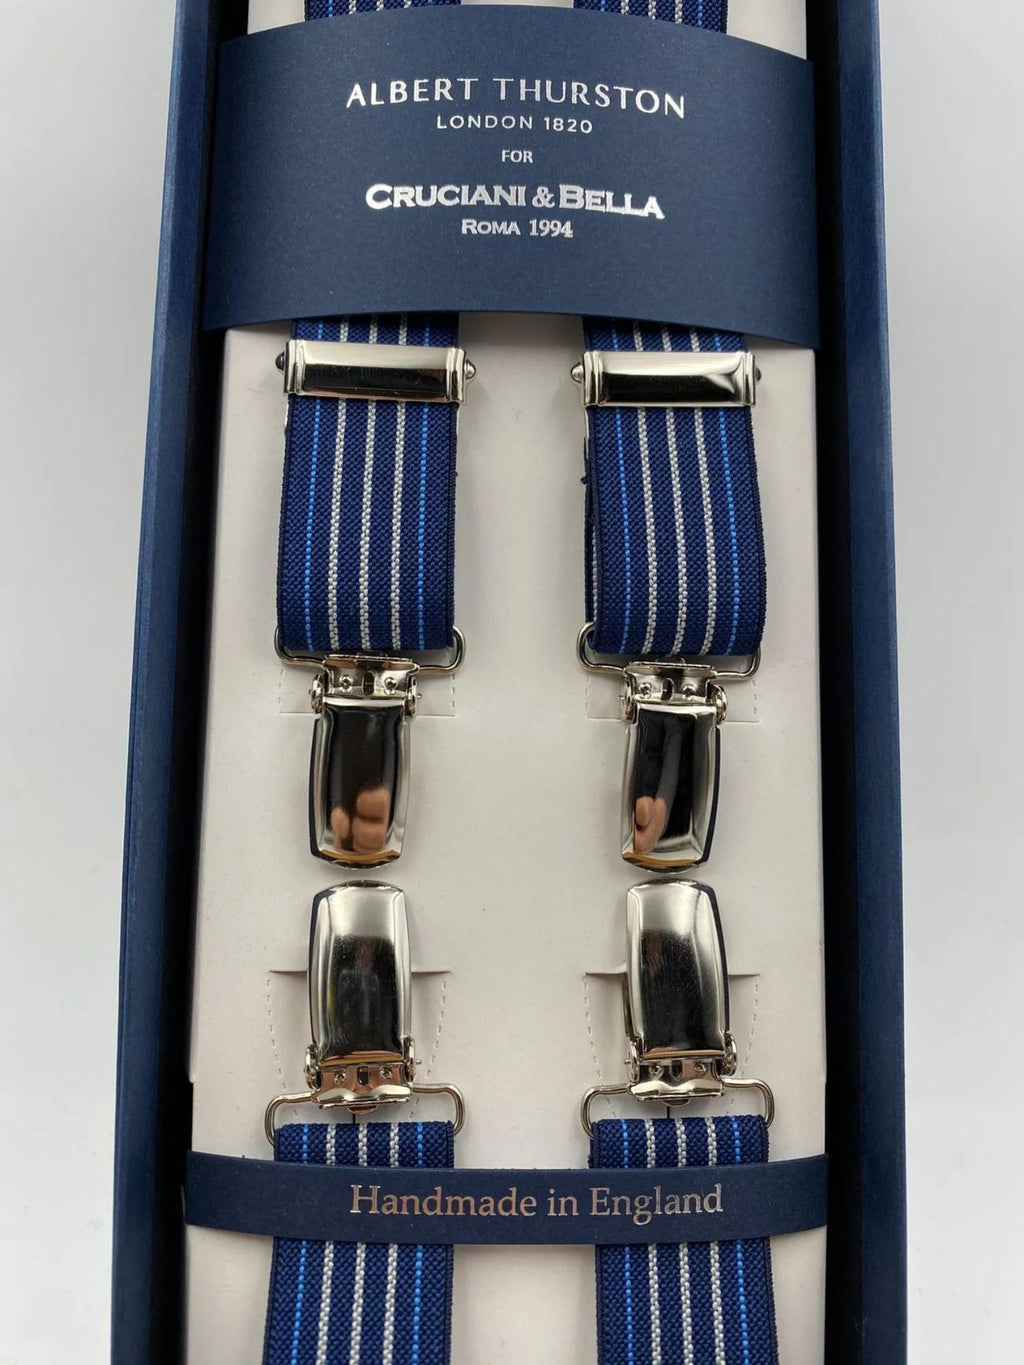 Albert Thurston for Cruciani & Bella Made in England Clip on Adjustable Sizing 25 mm elastic braces Blue and White Stripes X-Shaped Nickel Fittings Size: L